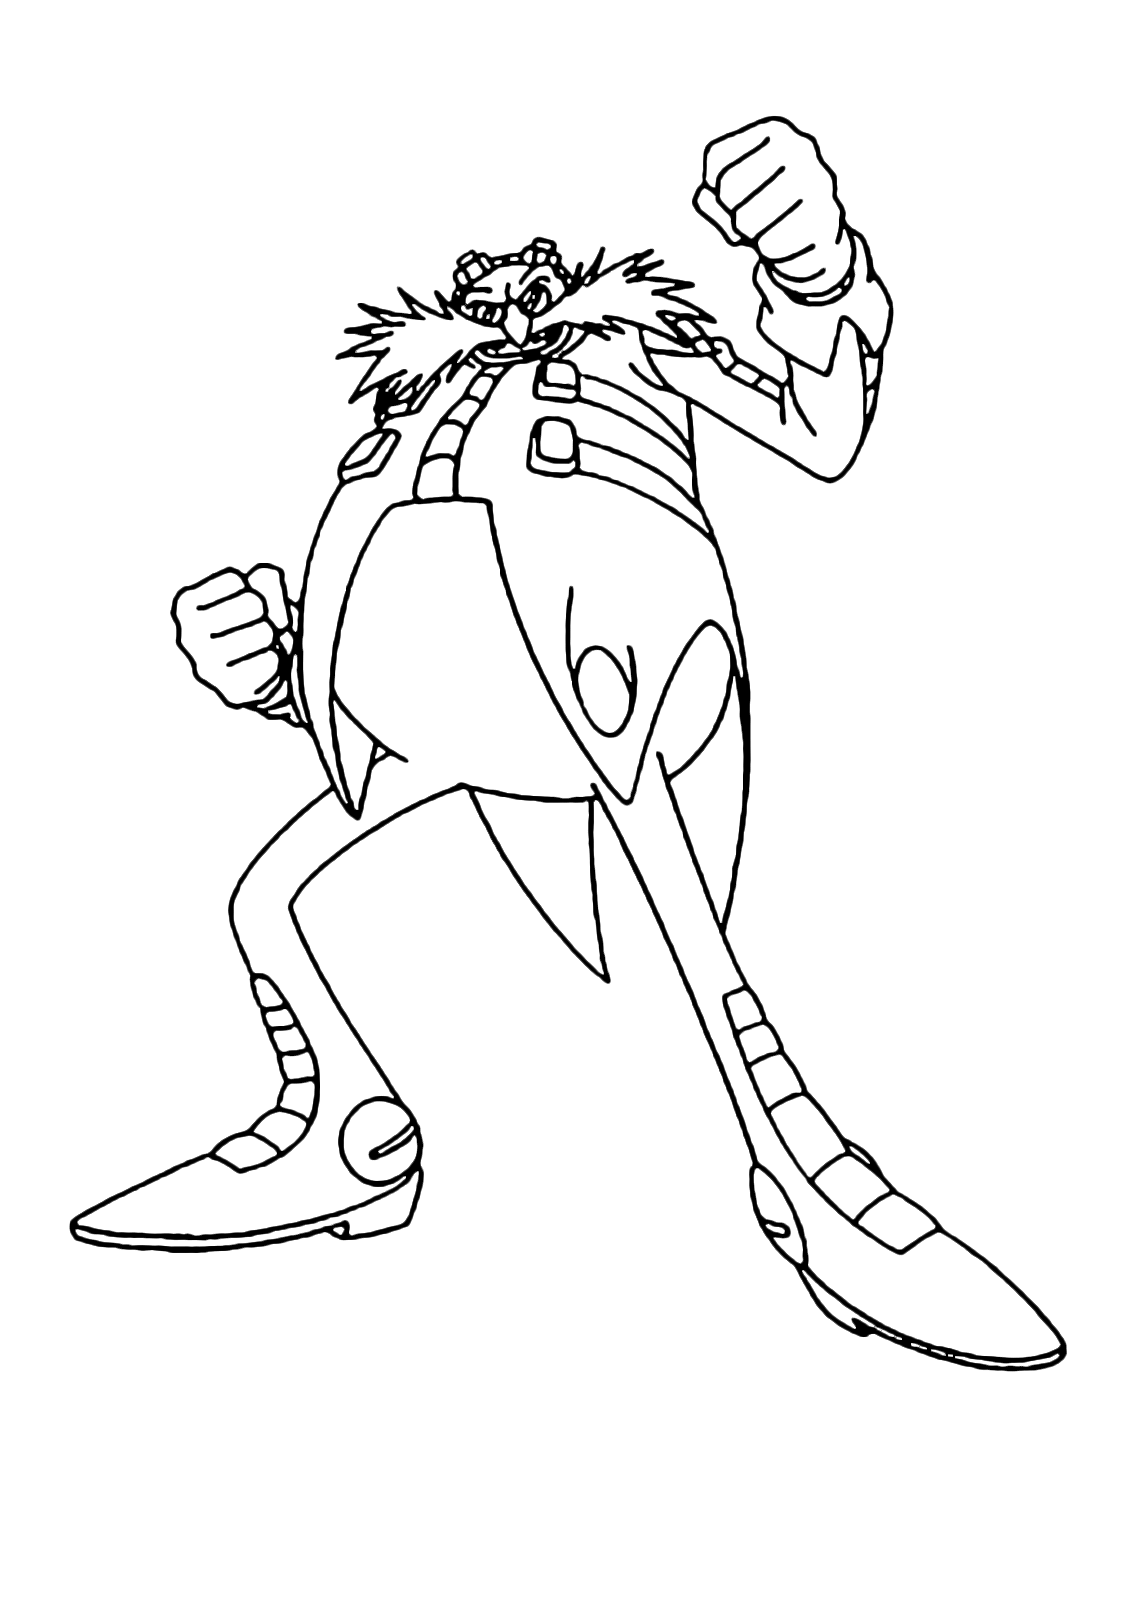 Strong Doctor Eggman Coloring Page - Free Printable Coloring Pages for Kids